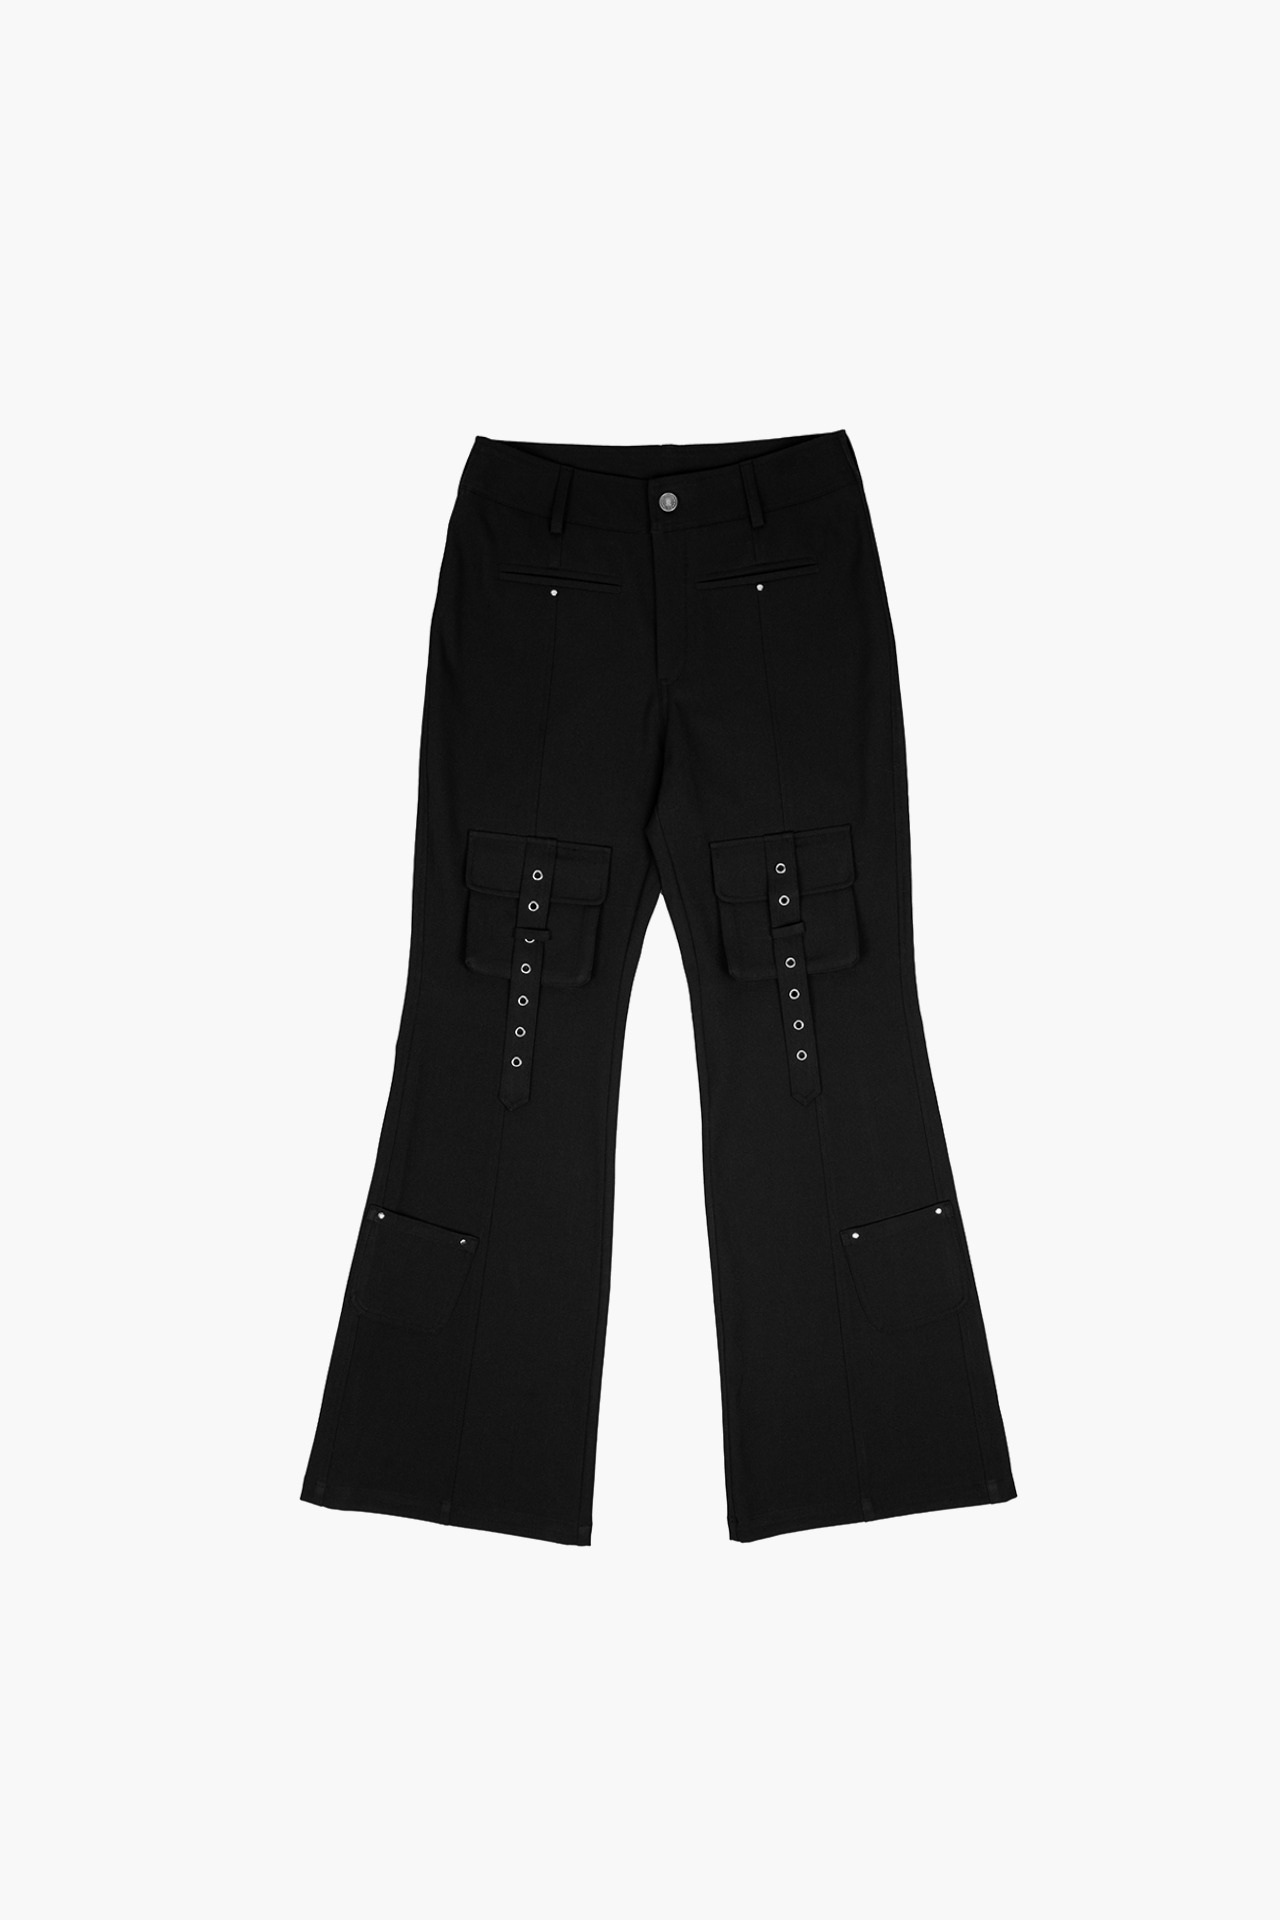 SILVER POINT CARGO PANTS BLACK